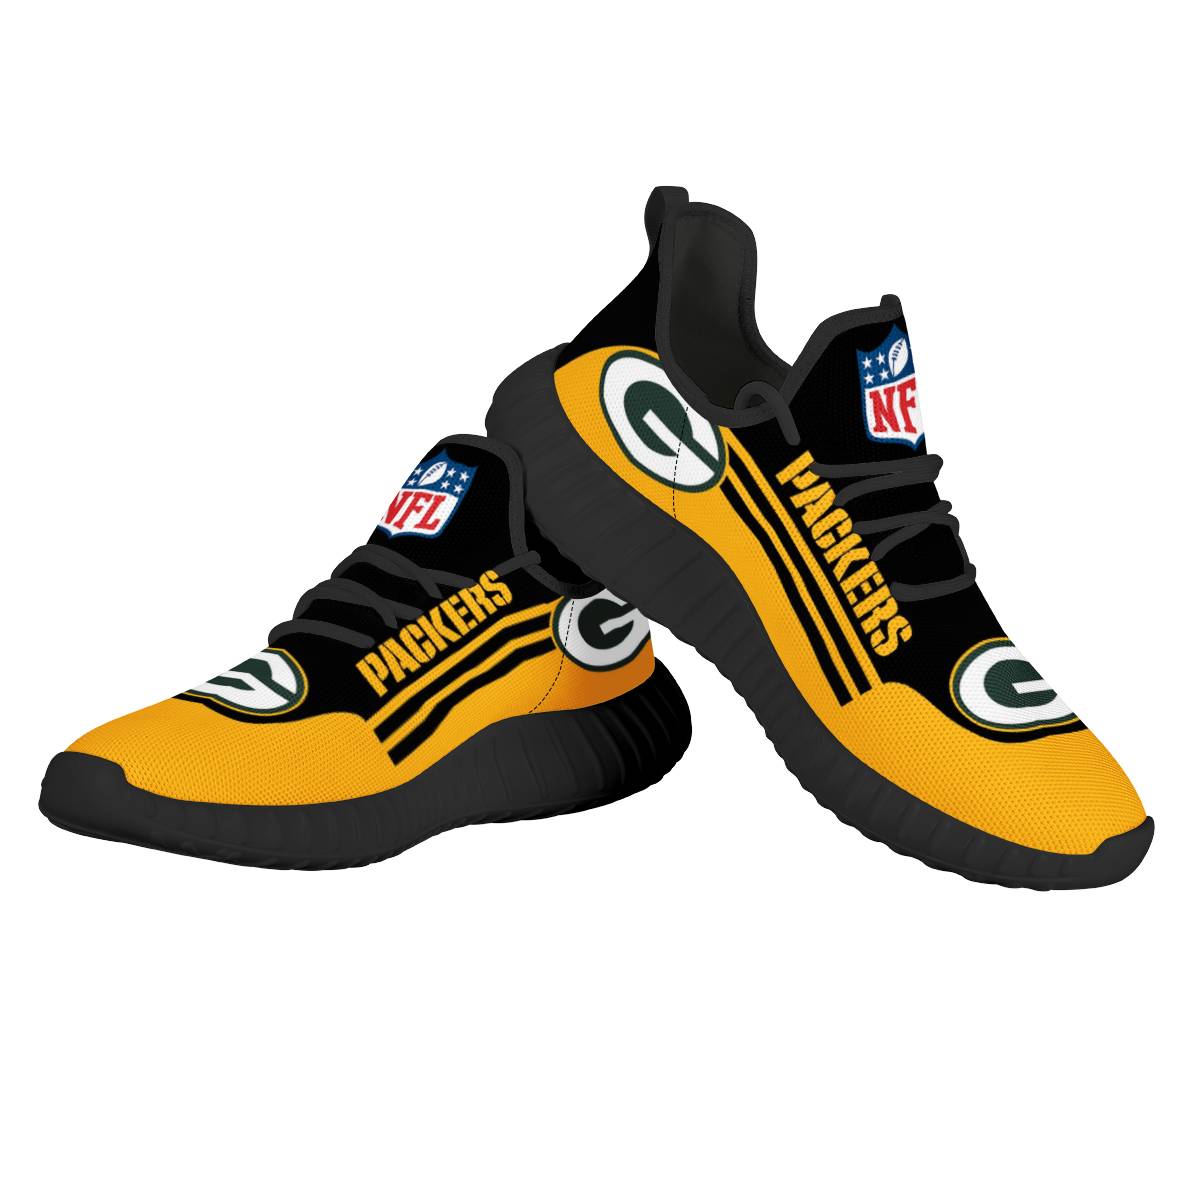 Women's NFL Green Bay Packers Mesh Knit Sneakers/Shoes 007